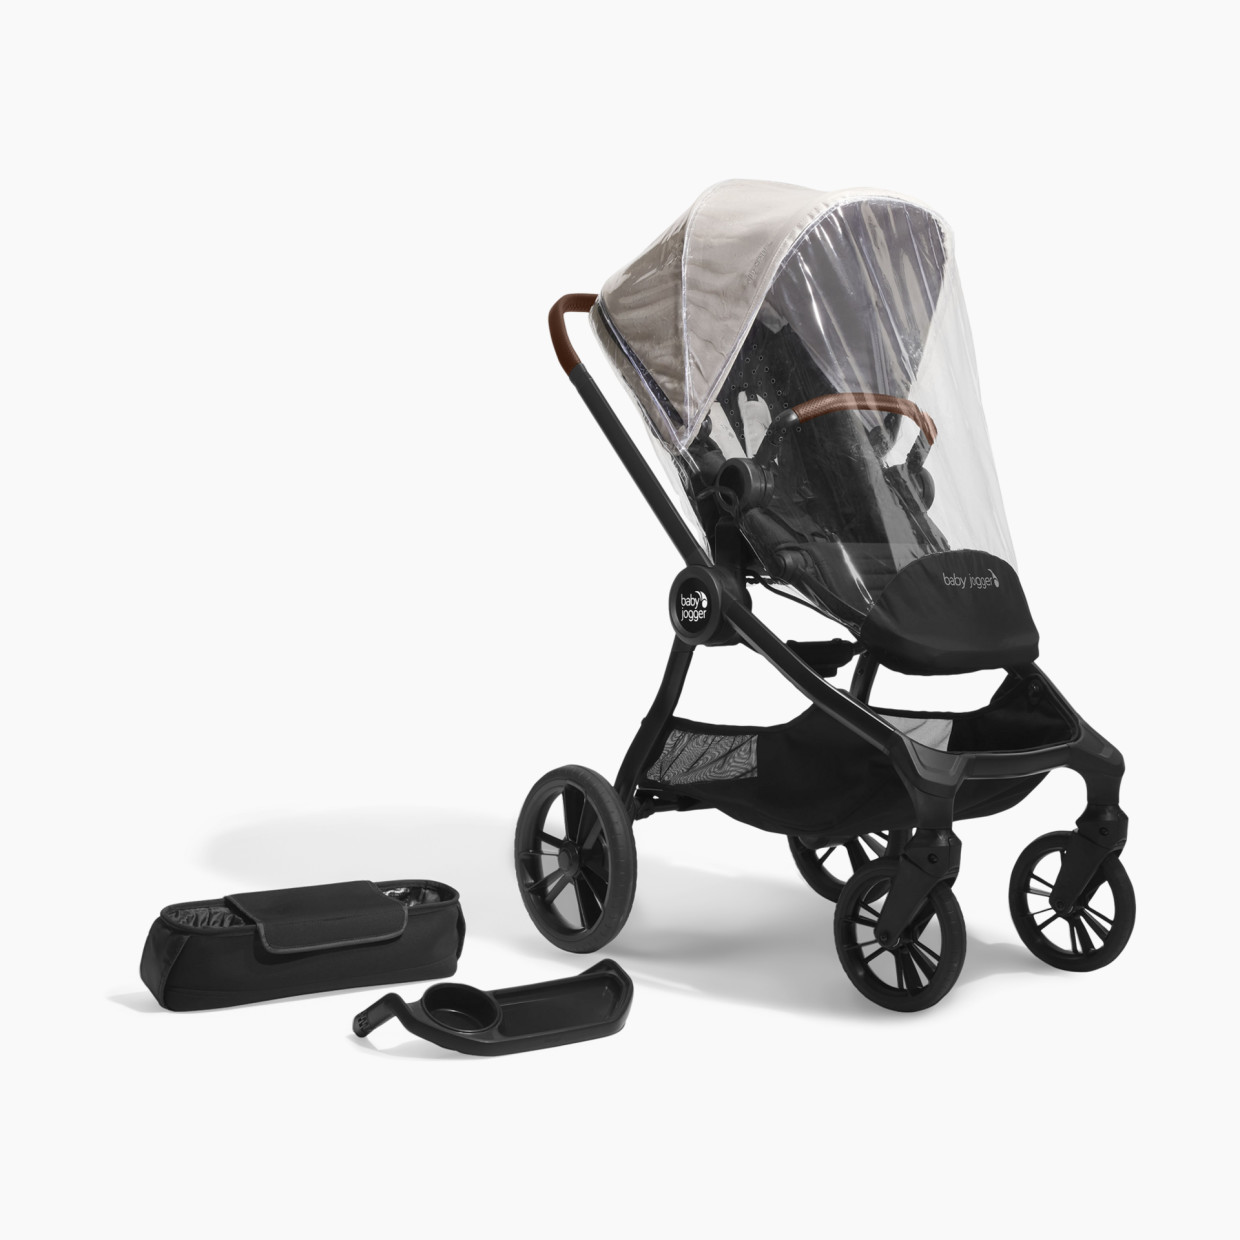 Baby Jogger City Sights Stroller All-in-One Bundle - Eco Collection.